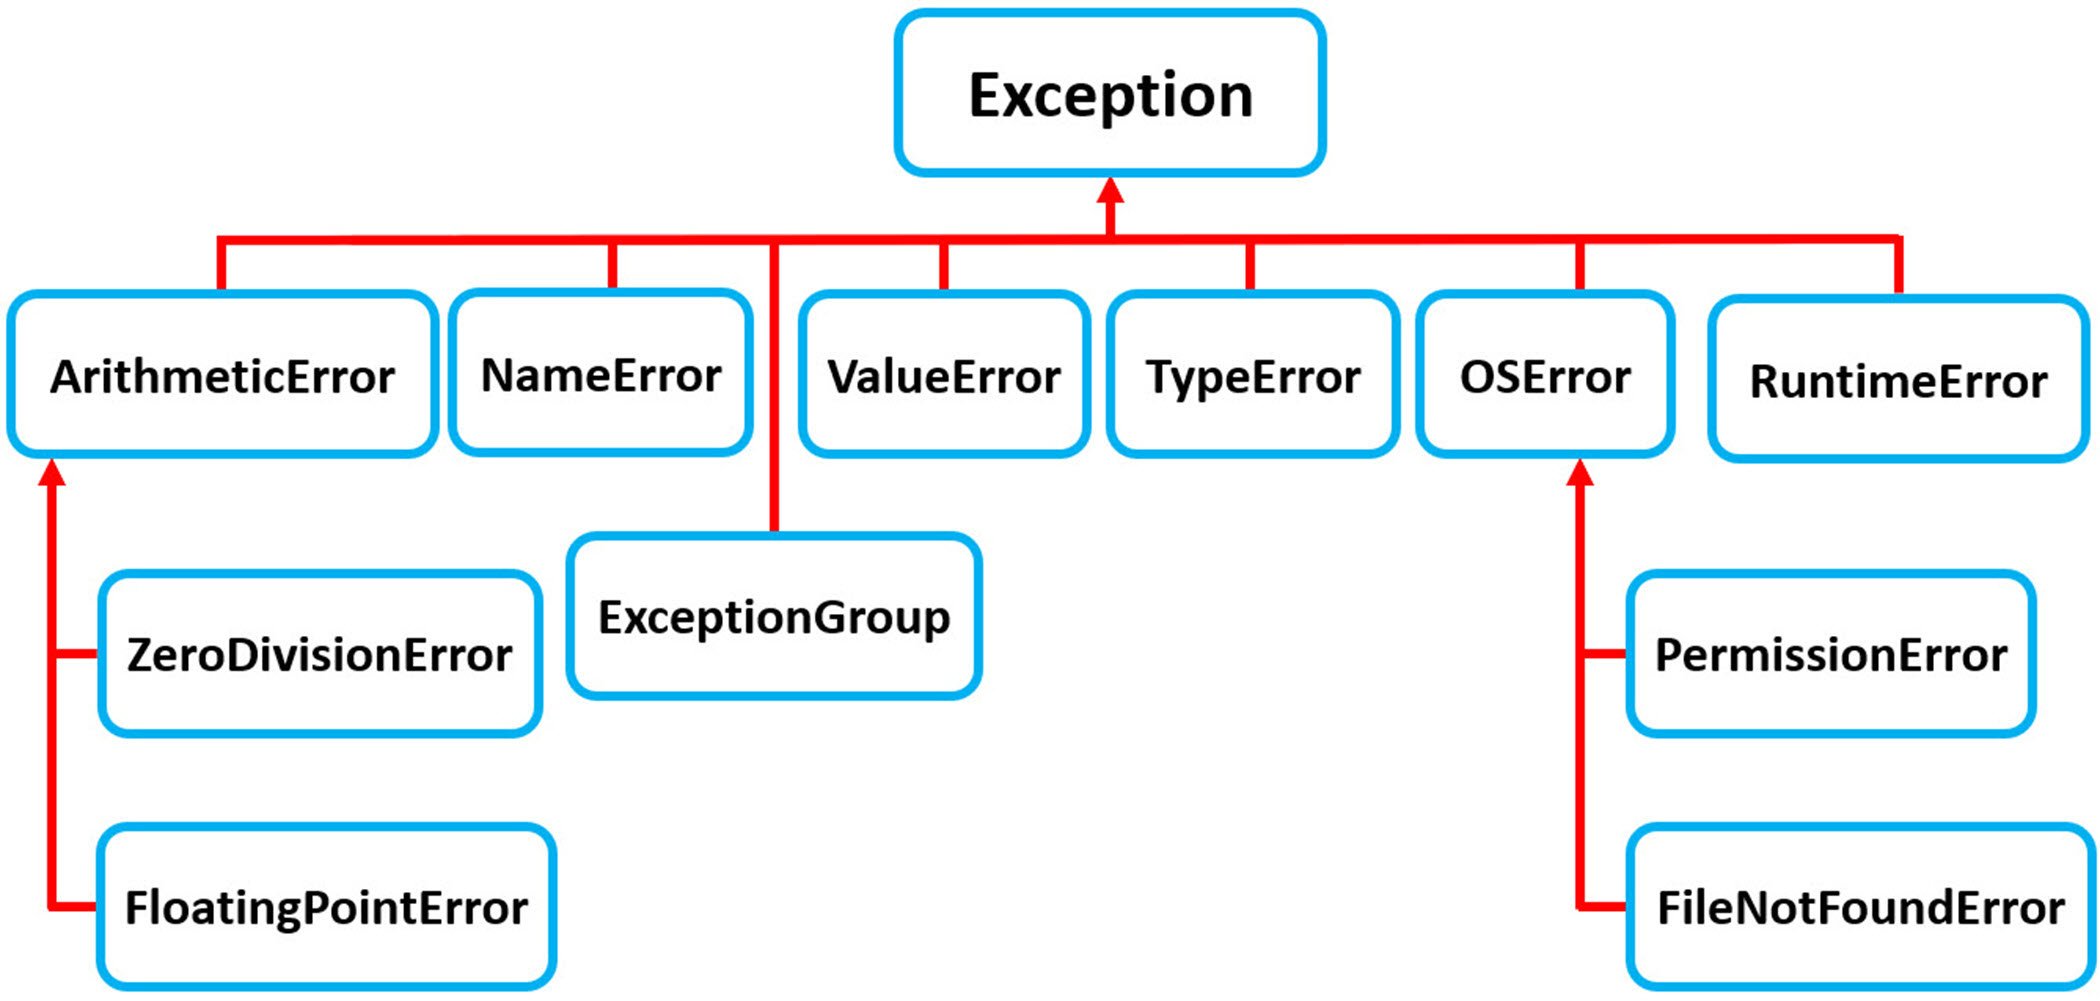 The main exception classes in Python.